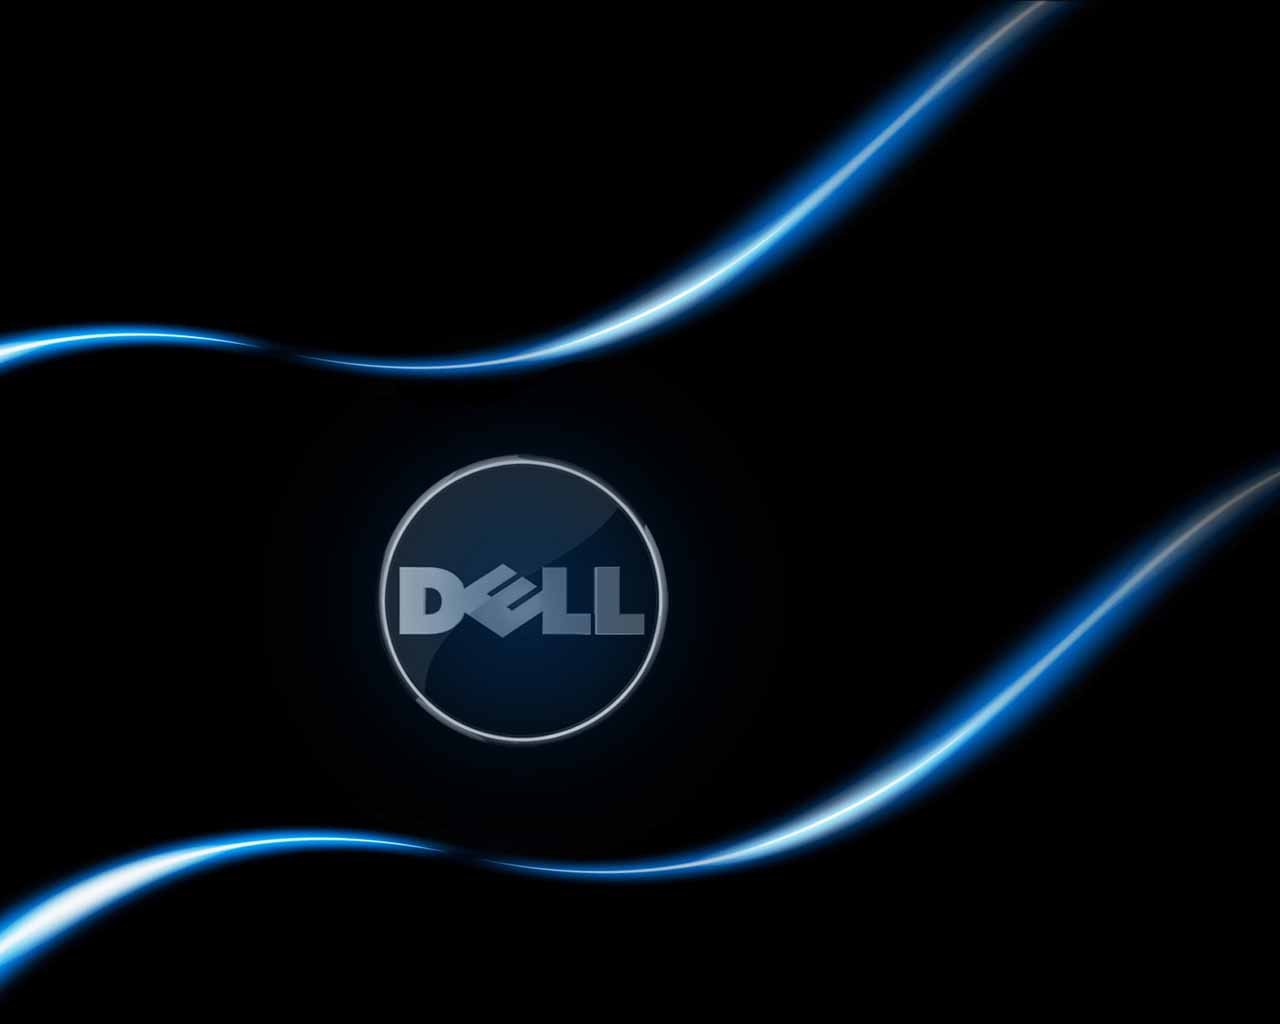 42 Dell Home Screen Wallpapers On Wallpapersafari